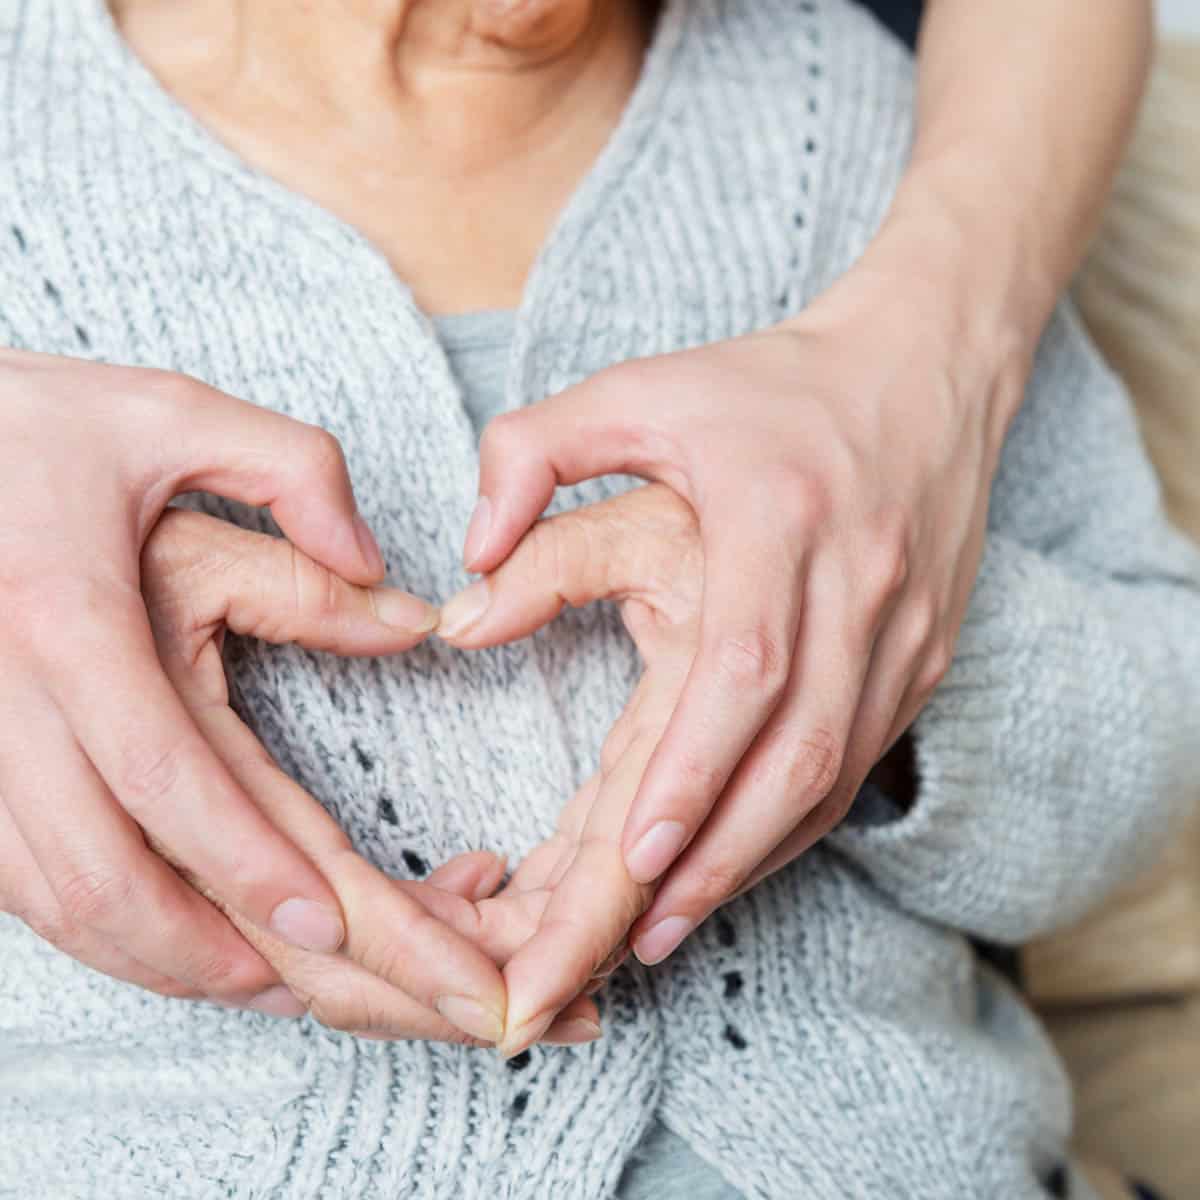 Old and young hands forming a heart on over a ladies heart. SHe is wearing a blue knit jumper.